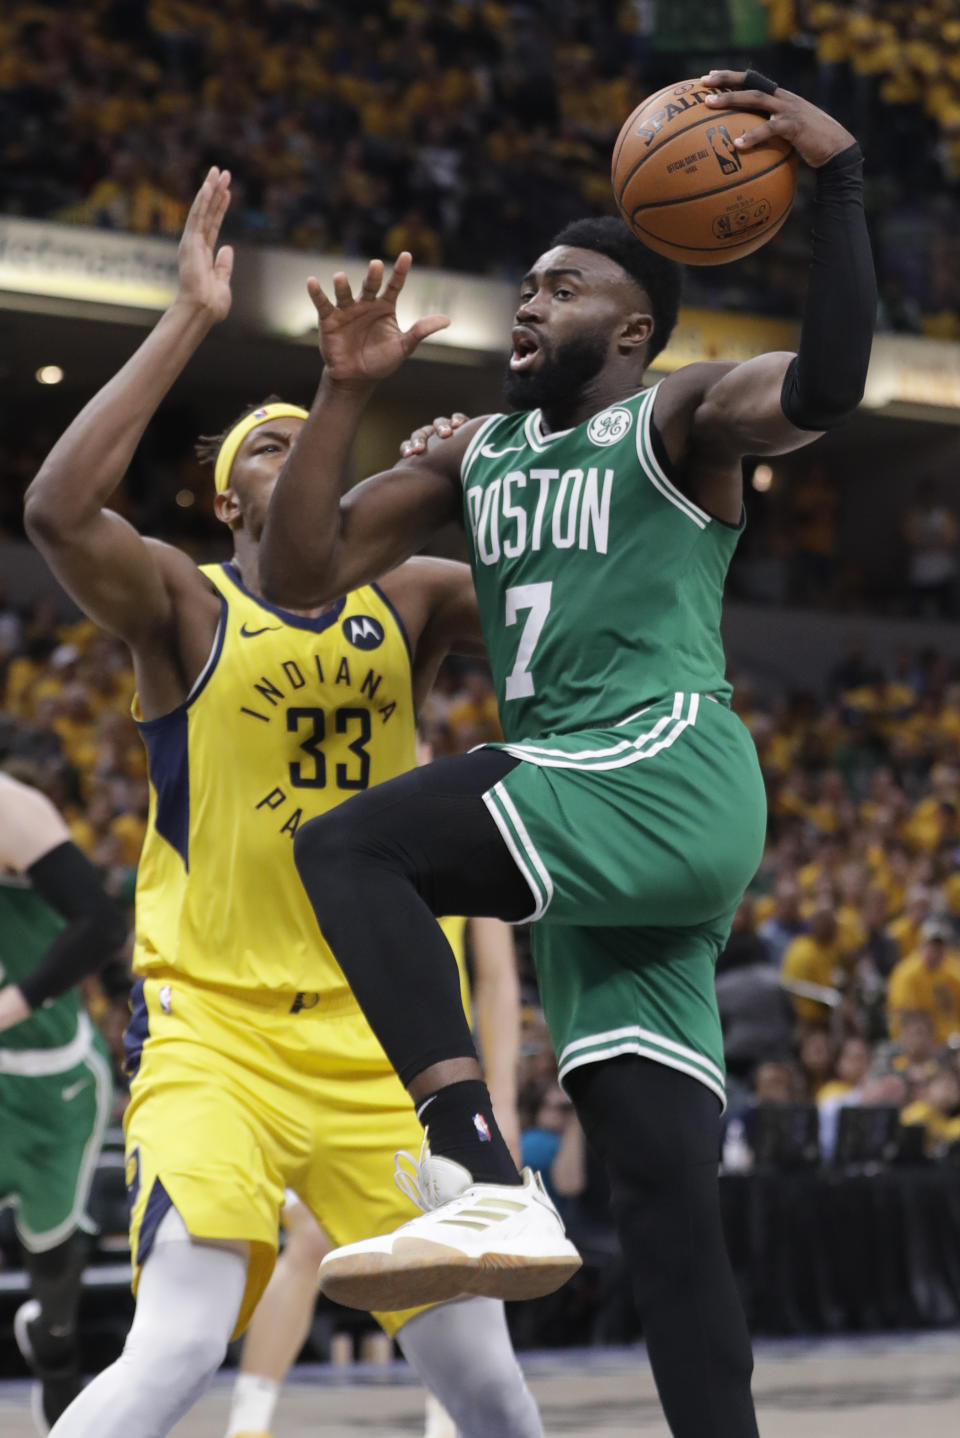 Boston Celtics guard Jaylen Brown (7) goes to the basket past Indiana Pacers center Myles Turner (33) during the second half of Game 3 of an NBA basketball first-round playoff series Friday, April 19, 2019, in Indianapolis. (AP Photo/Darron Cummings)